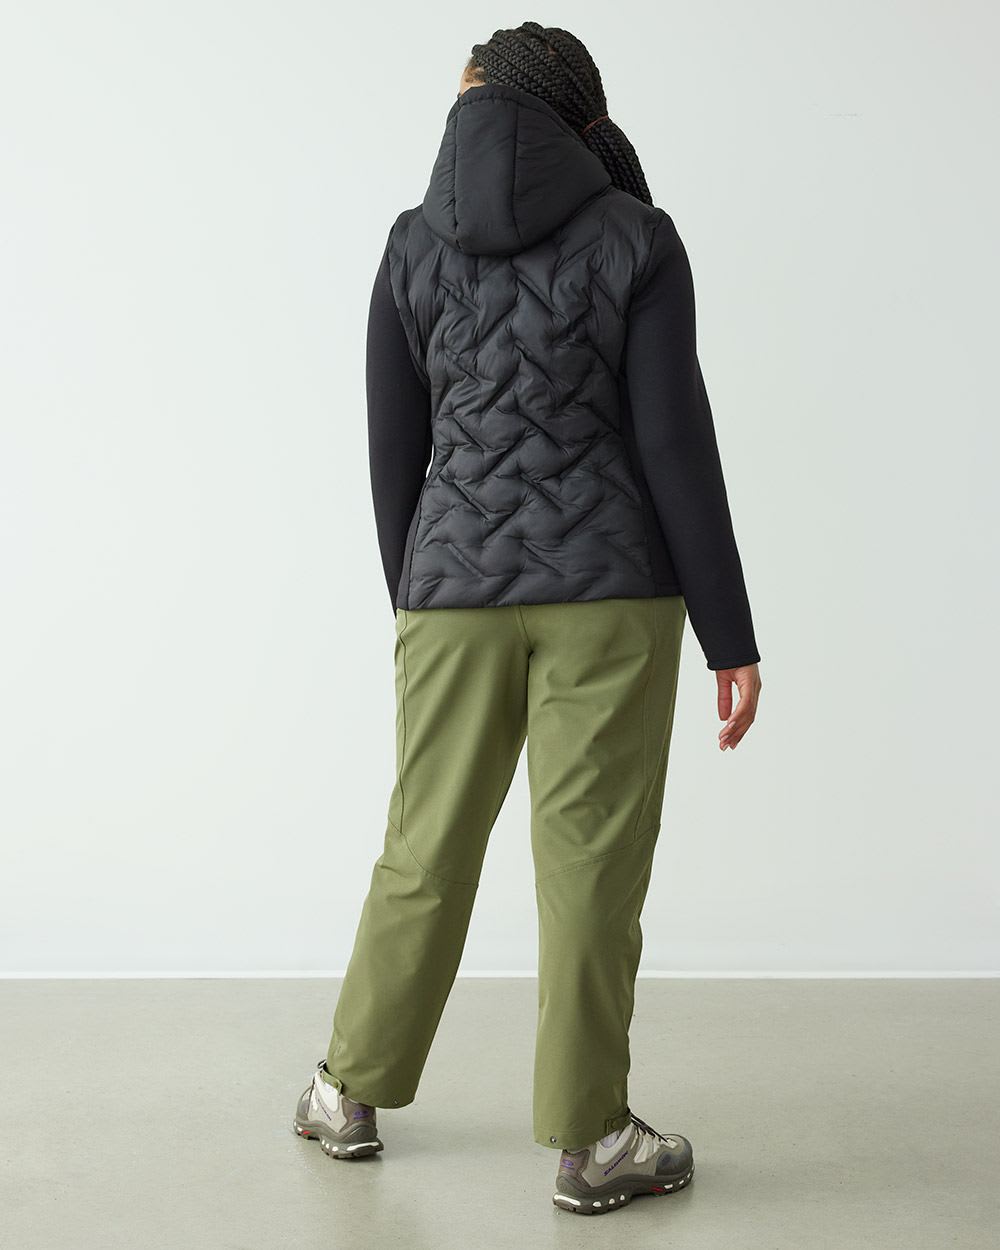 Mix-Media Quilted Jacket, Hyba